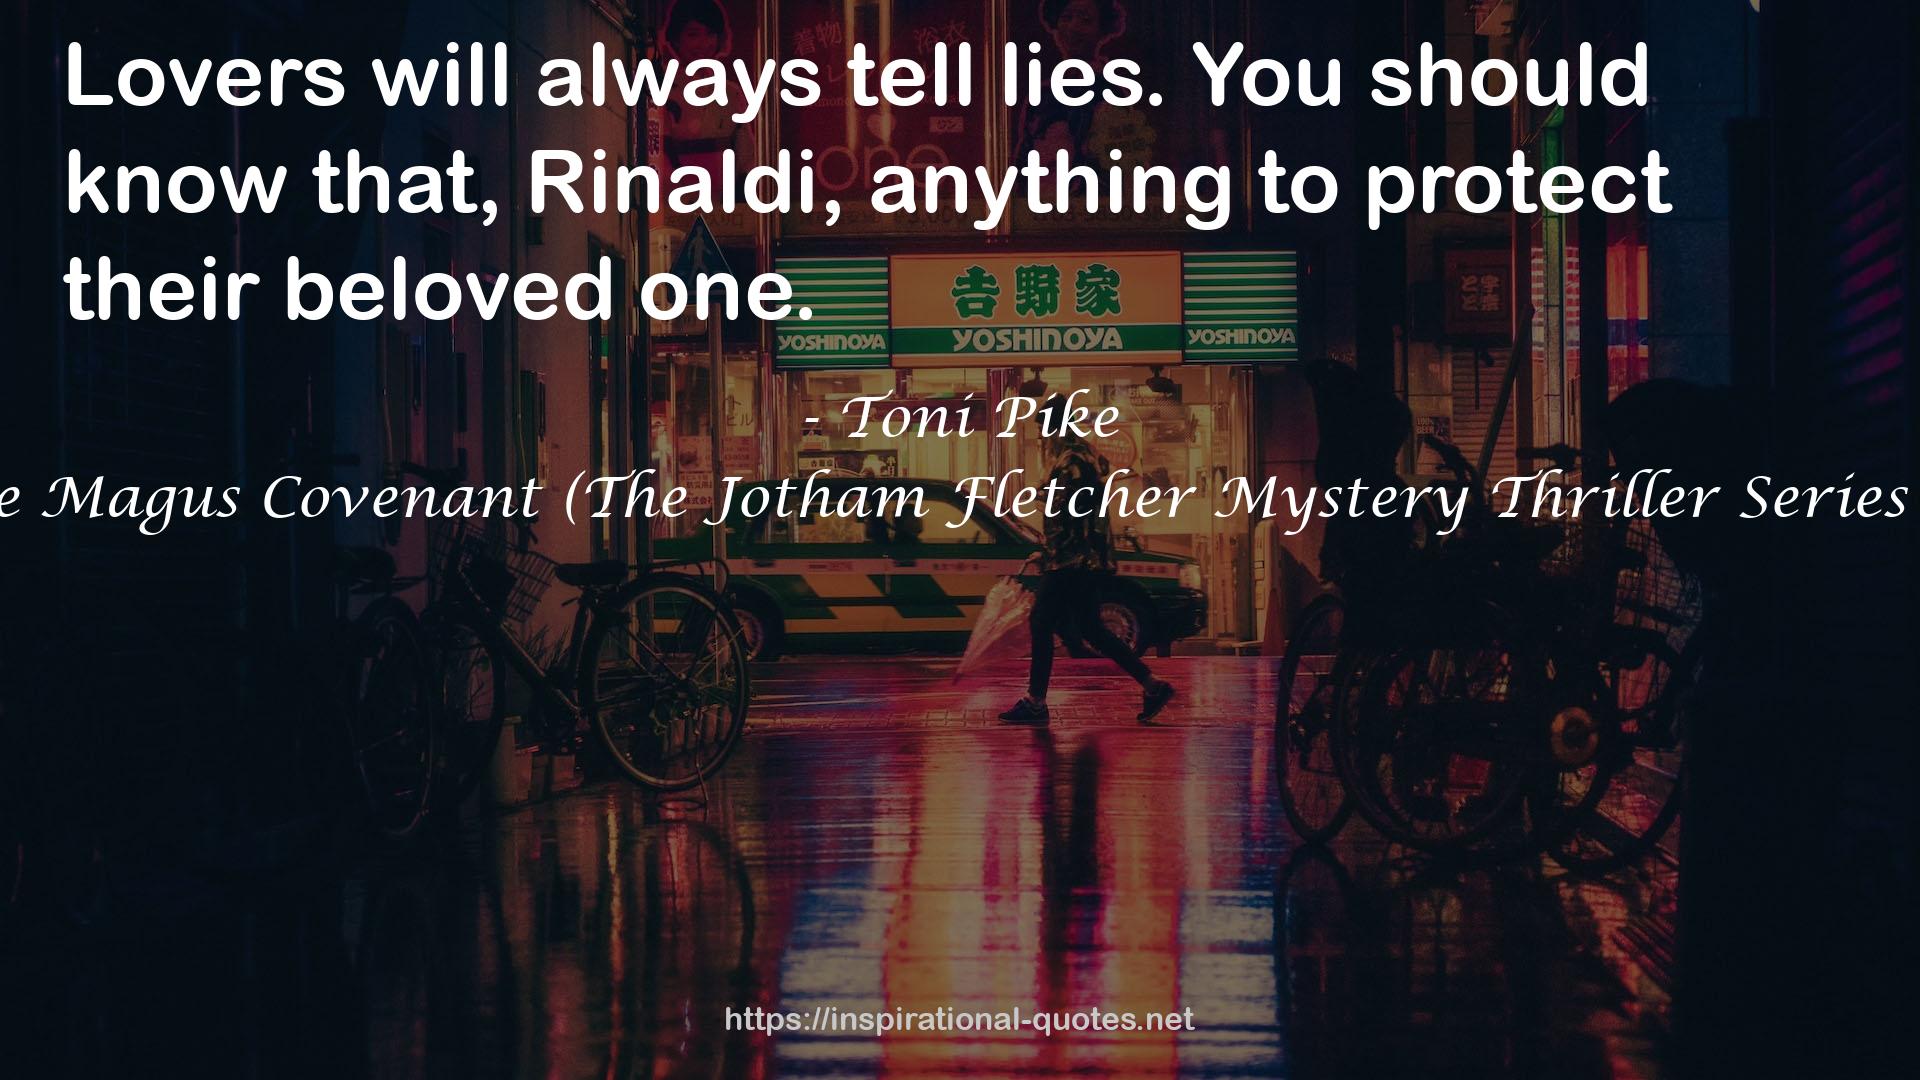 The Magus Covenant (The Jotham Fletcher Mystery Thriller Series #1) QUOTES